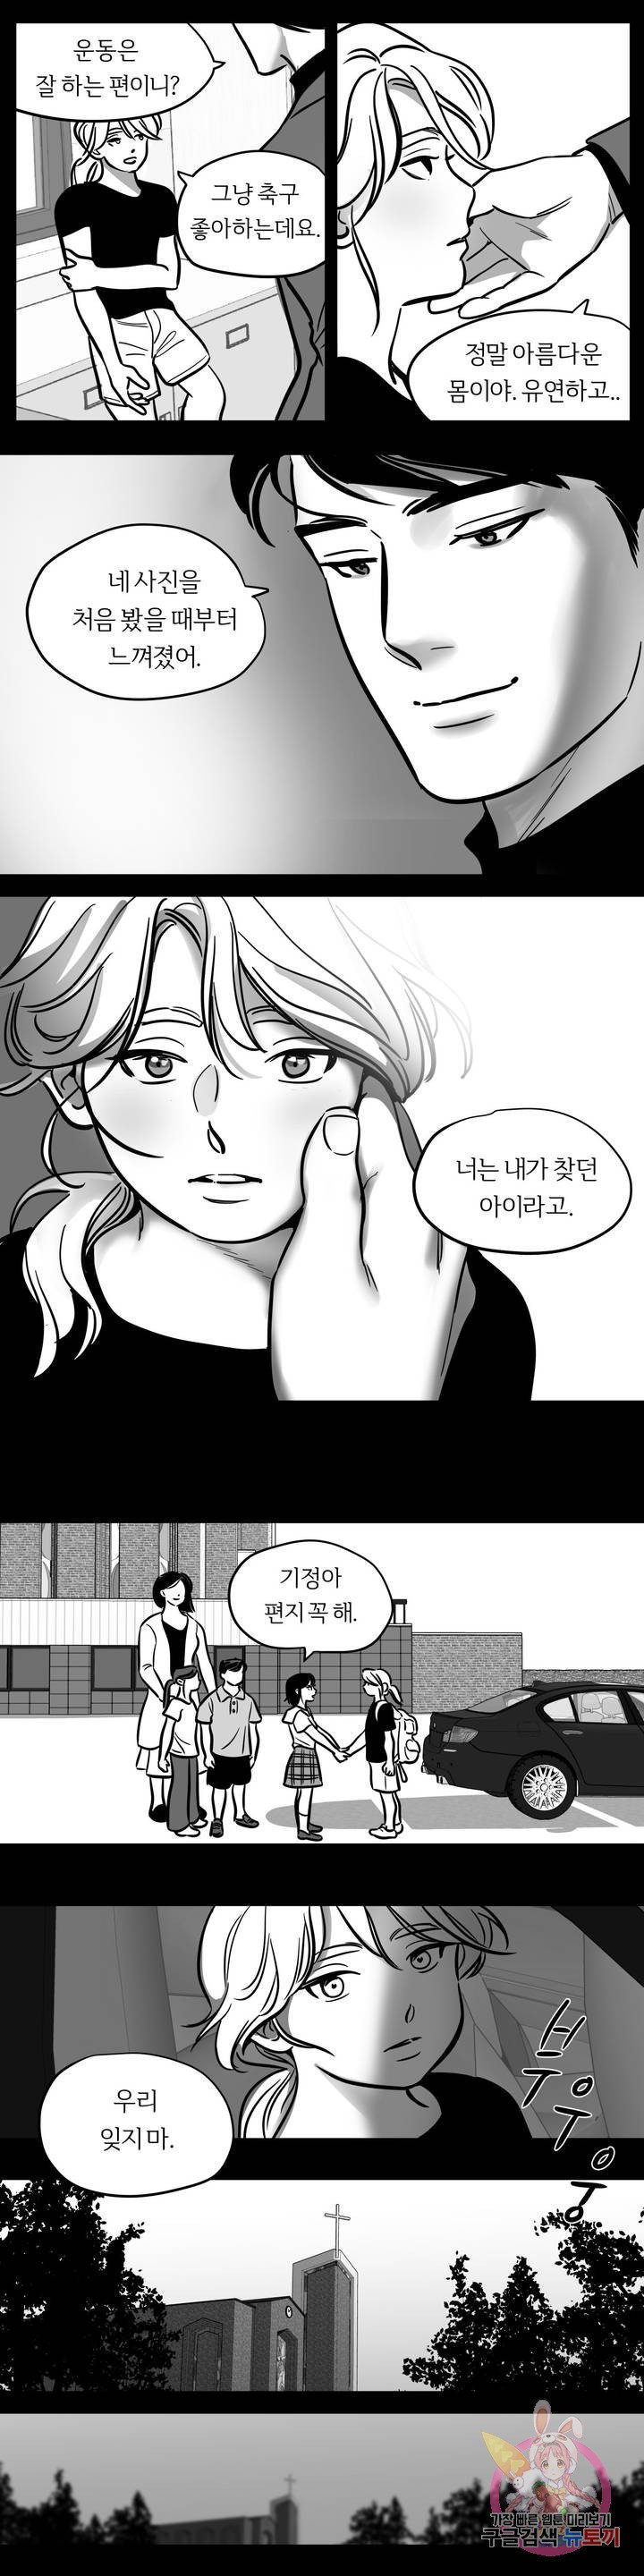 Snowman Raw - Chapter 42 Page 4